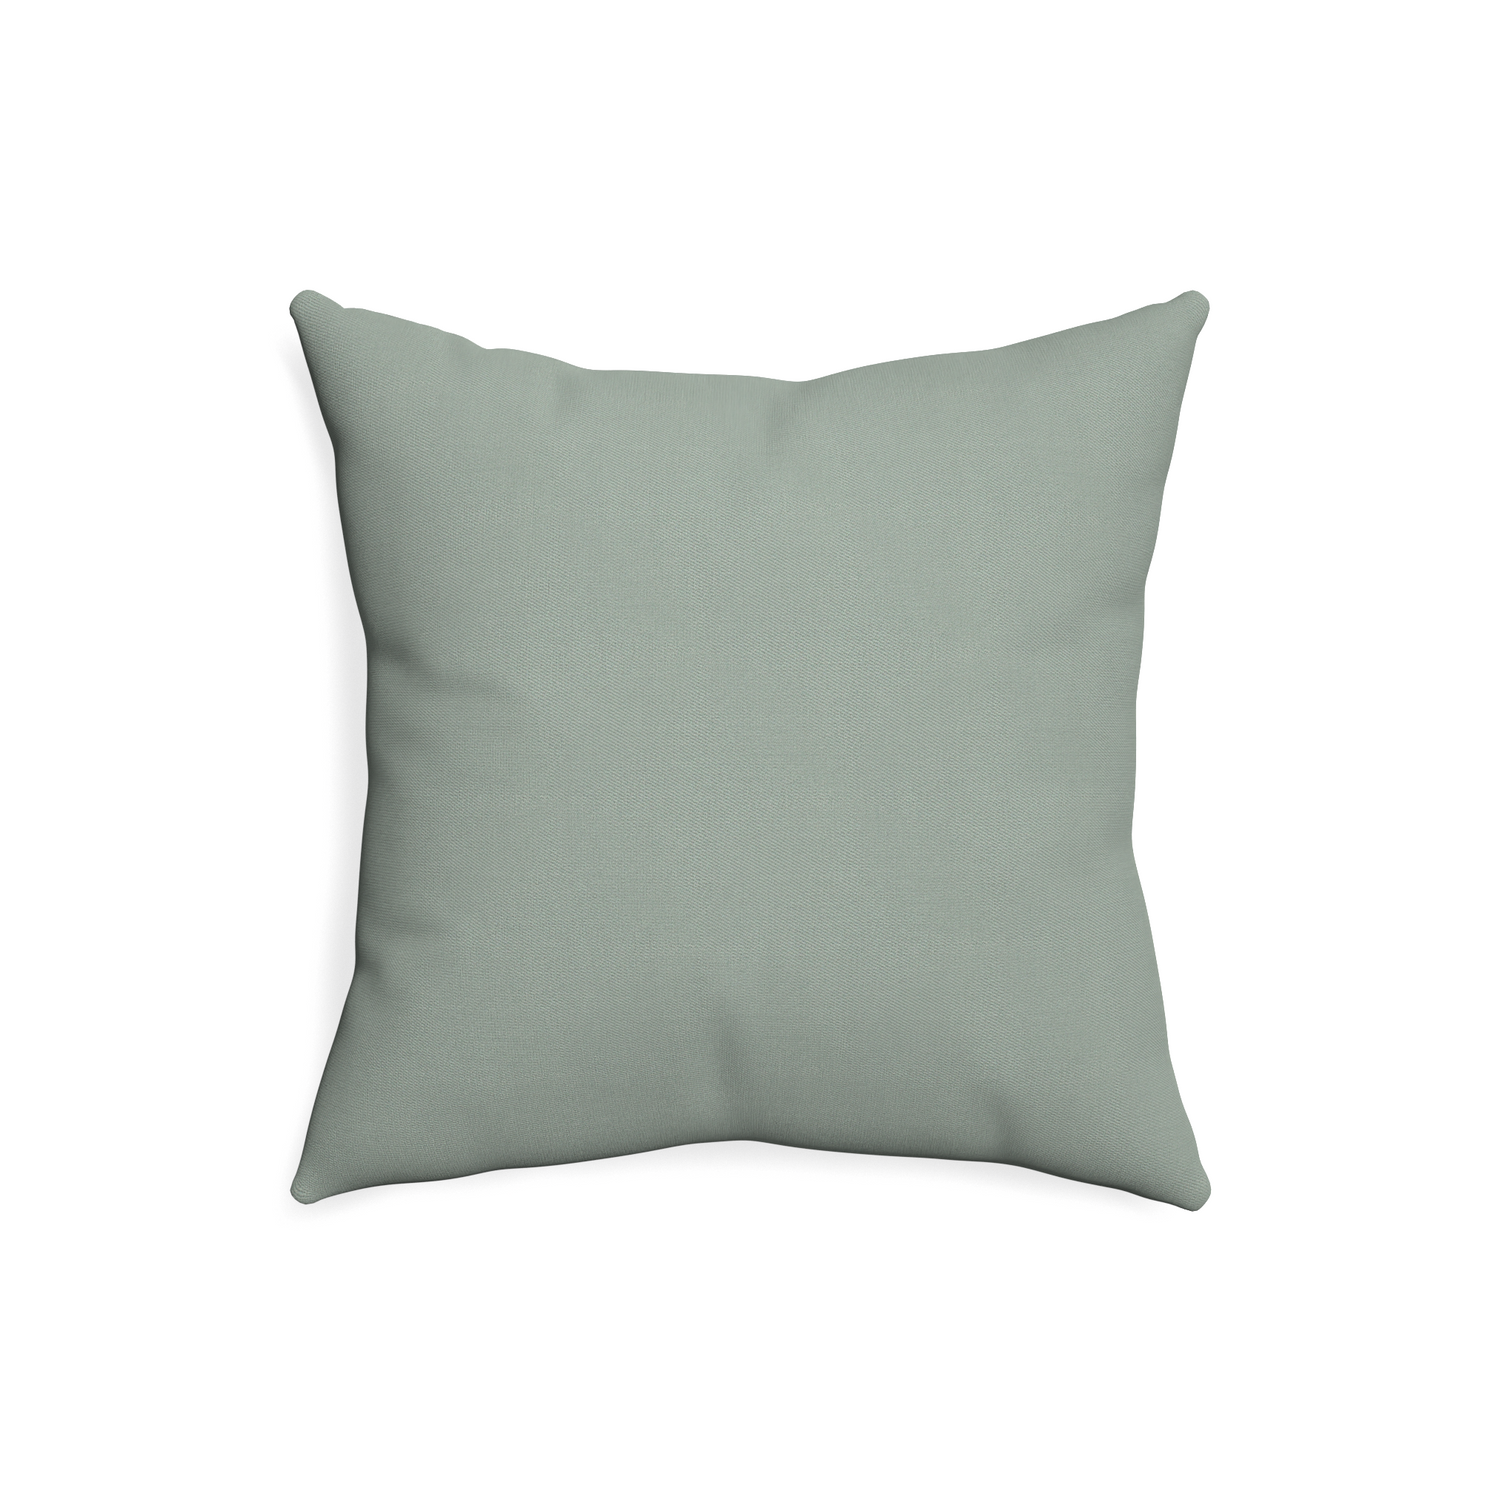 20-square sage custom sage green cottonpillow with none on white background